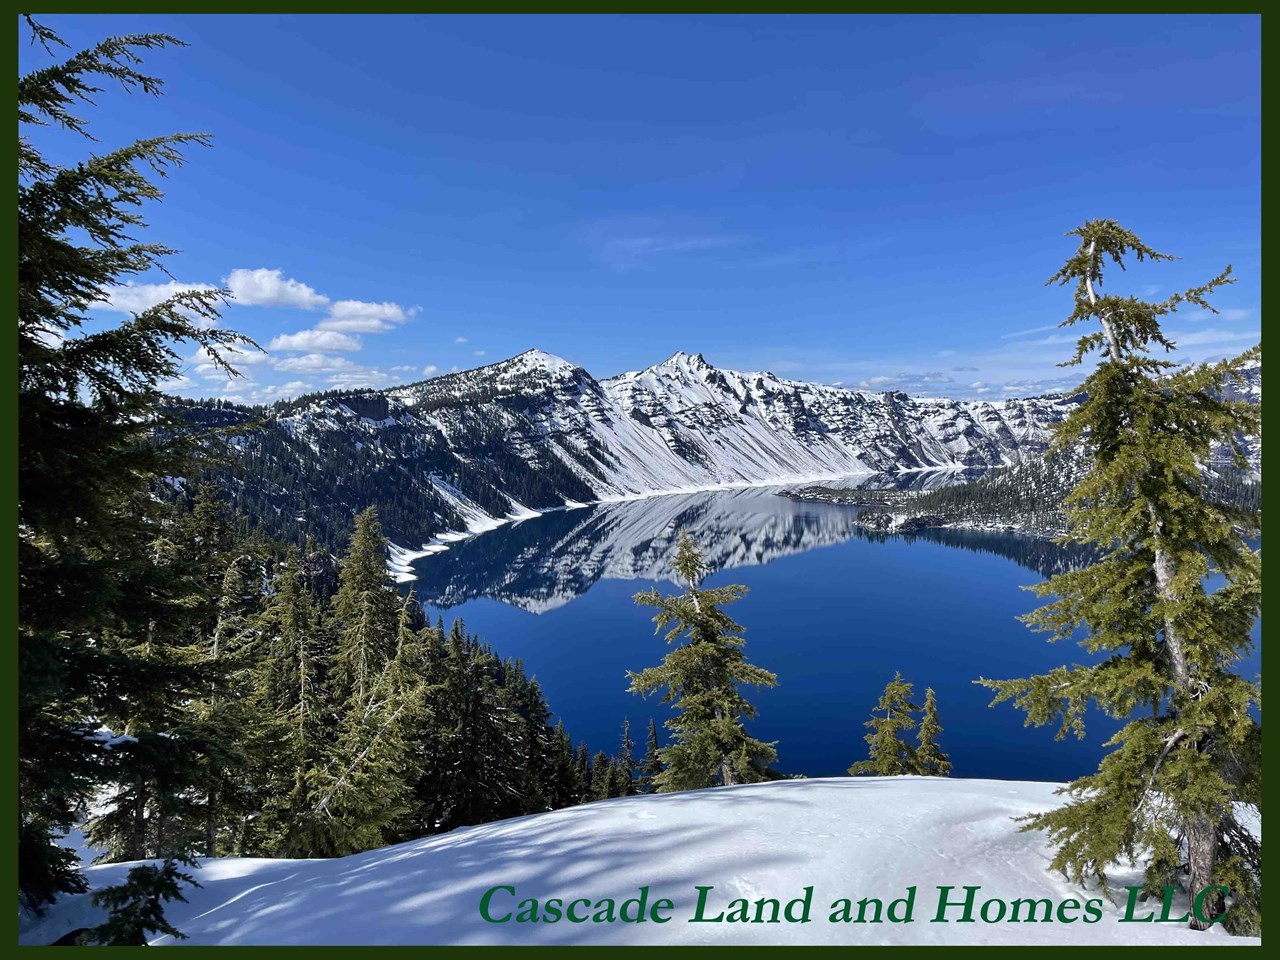 crater lake national park is just 40 miles away and is oregon’s only national park! crater lake is fed from rain and snow melt and is amazingly clear. at 1,949 feet deep, it is the deepest lake in the nation and is absolutely breathtaking! the entire park is an area of incredible beauty